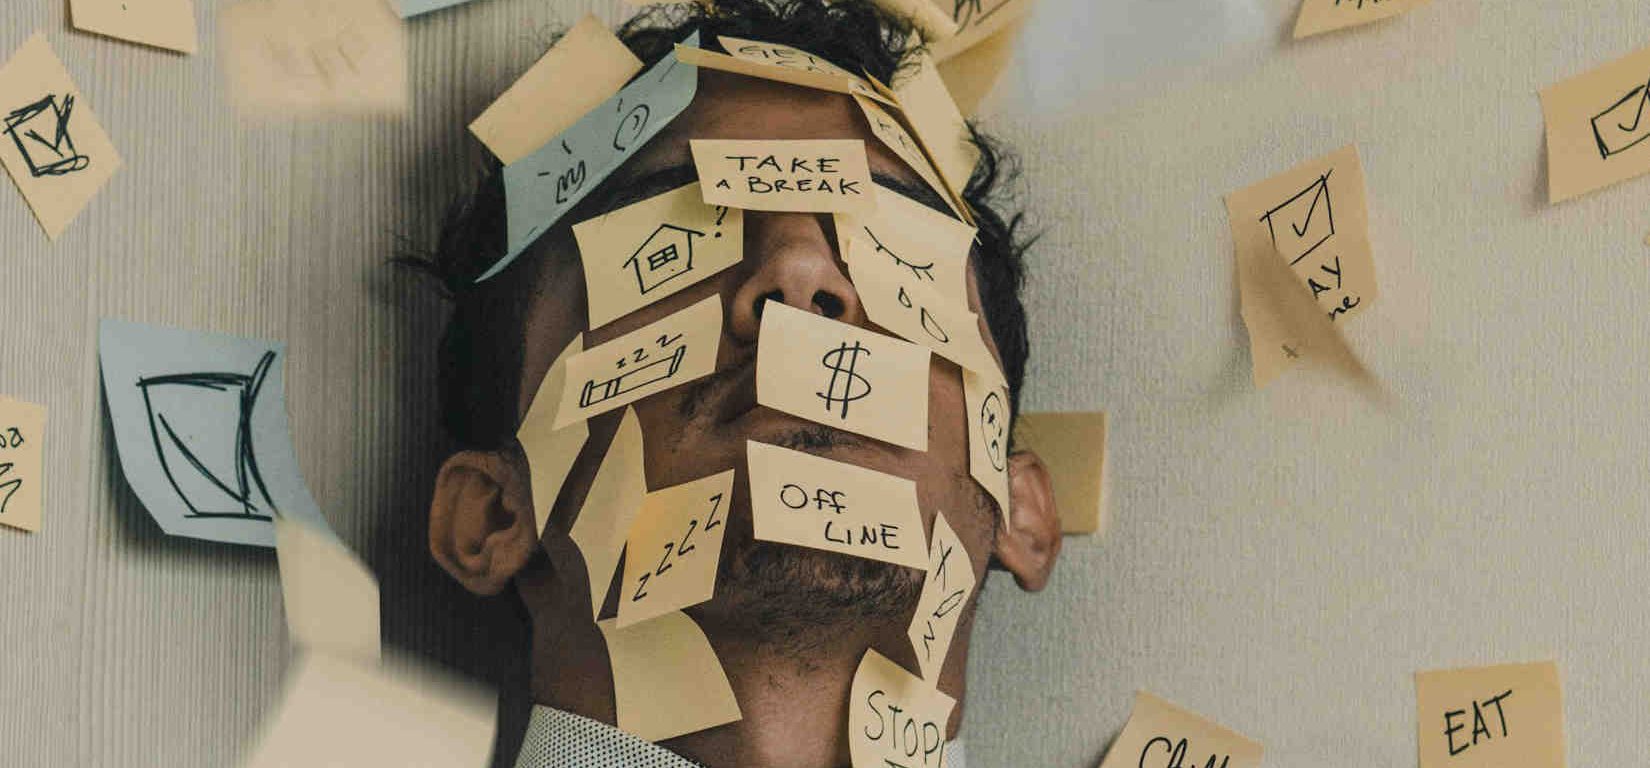 Man cornered between two walls with post-it notes all over his face and the walls. The notes have different responsibilities tied to work, home, finances, and self care.